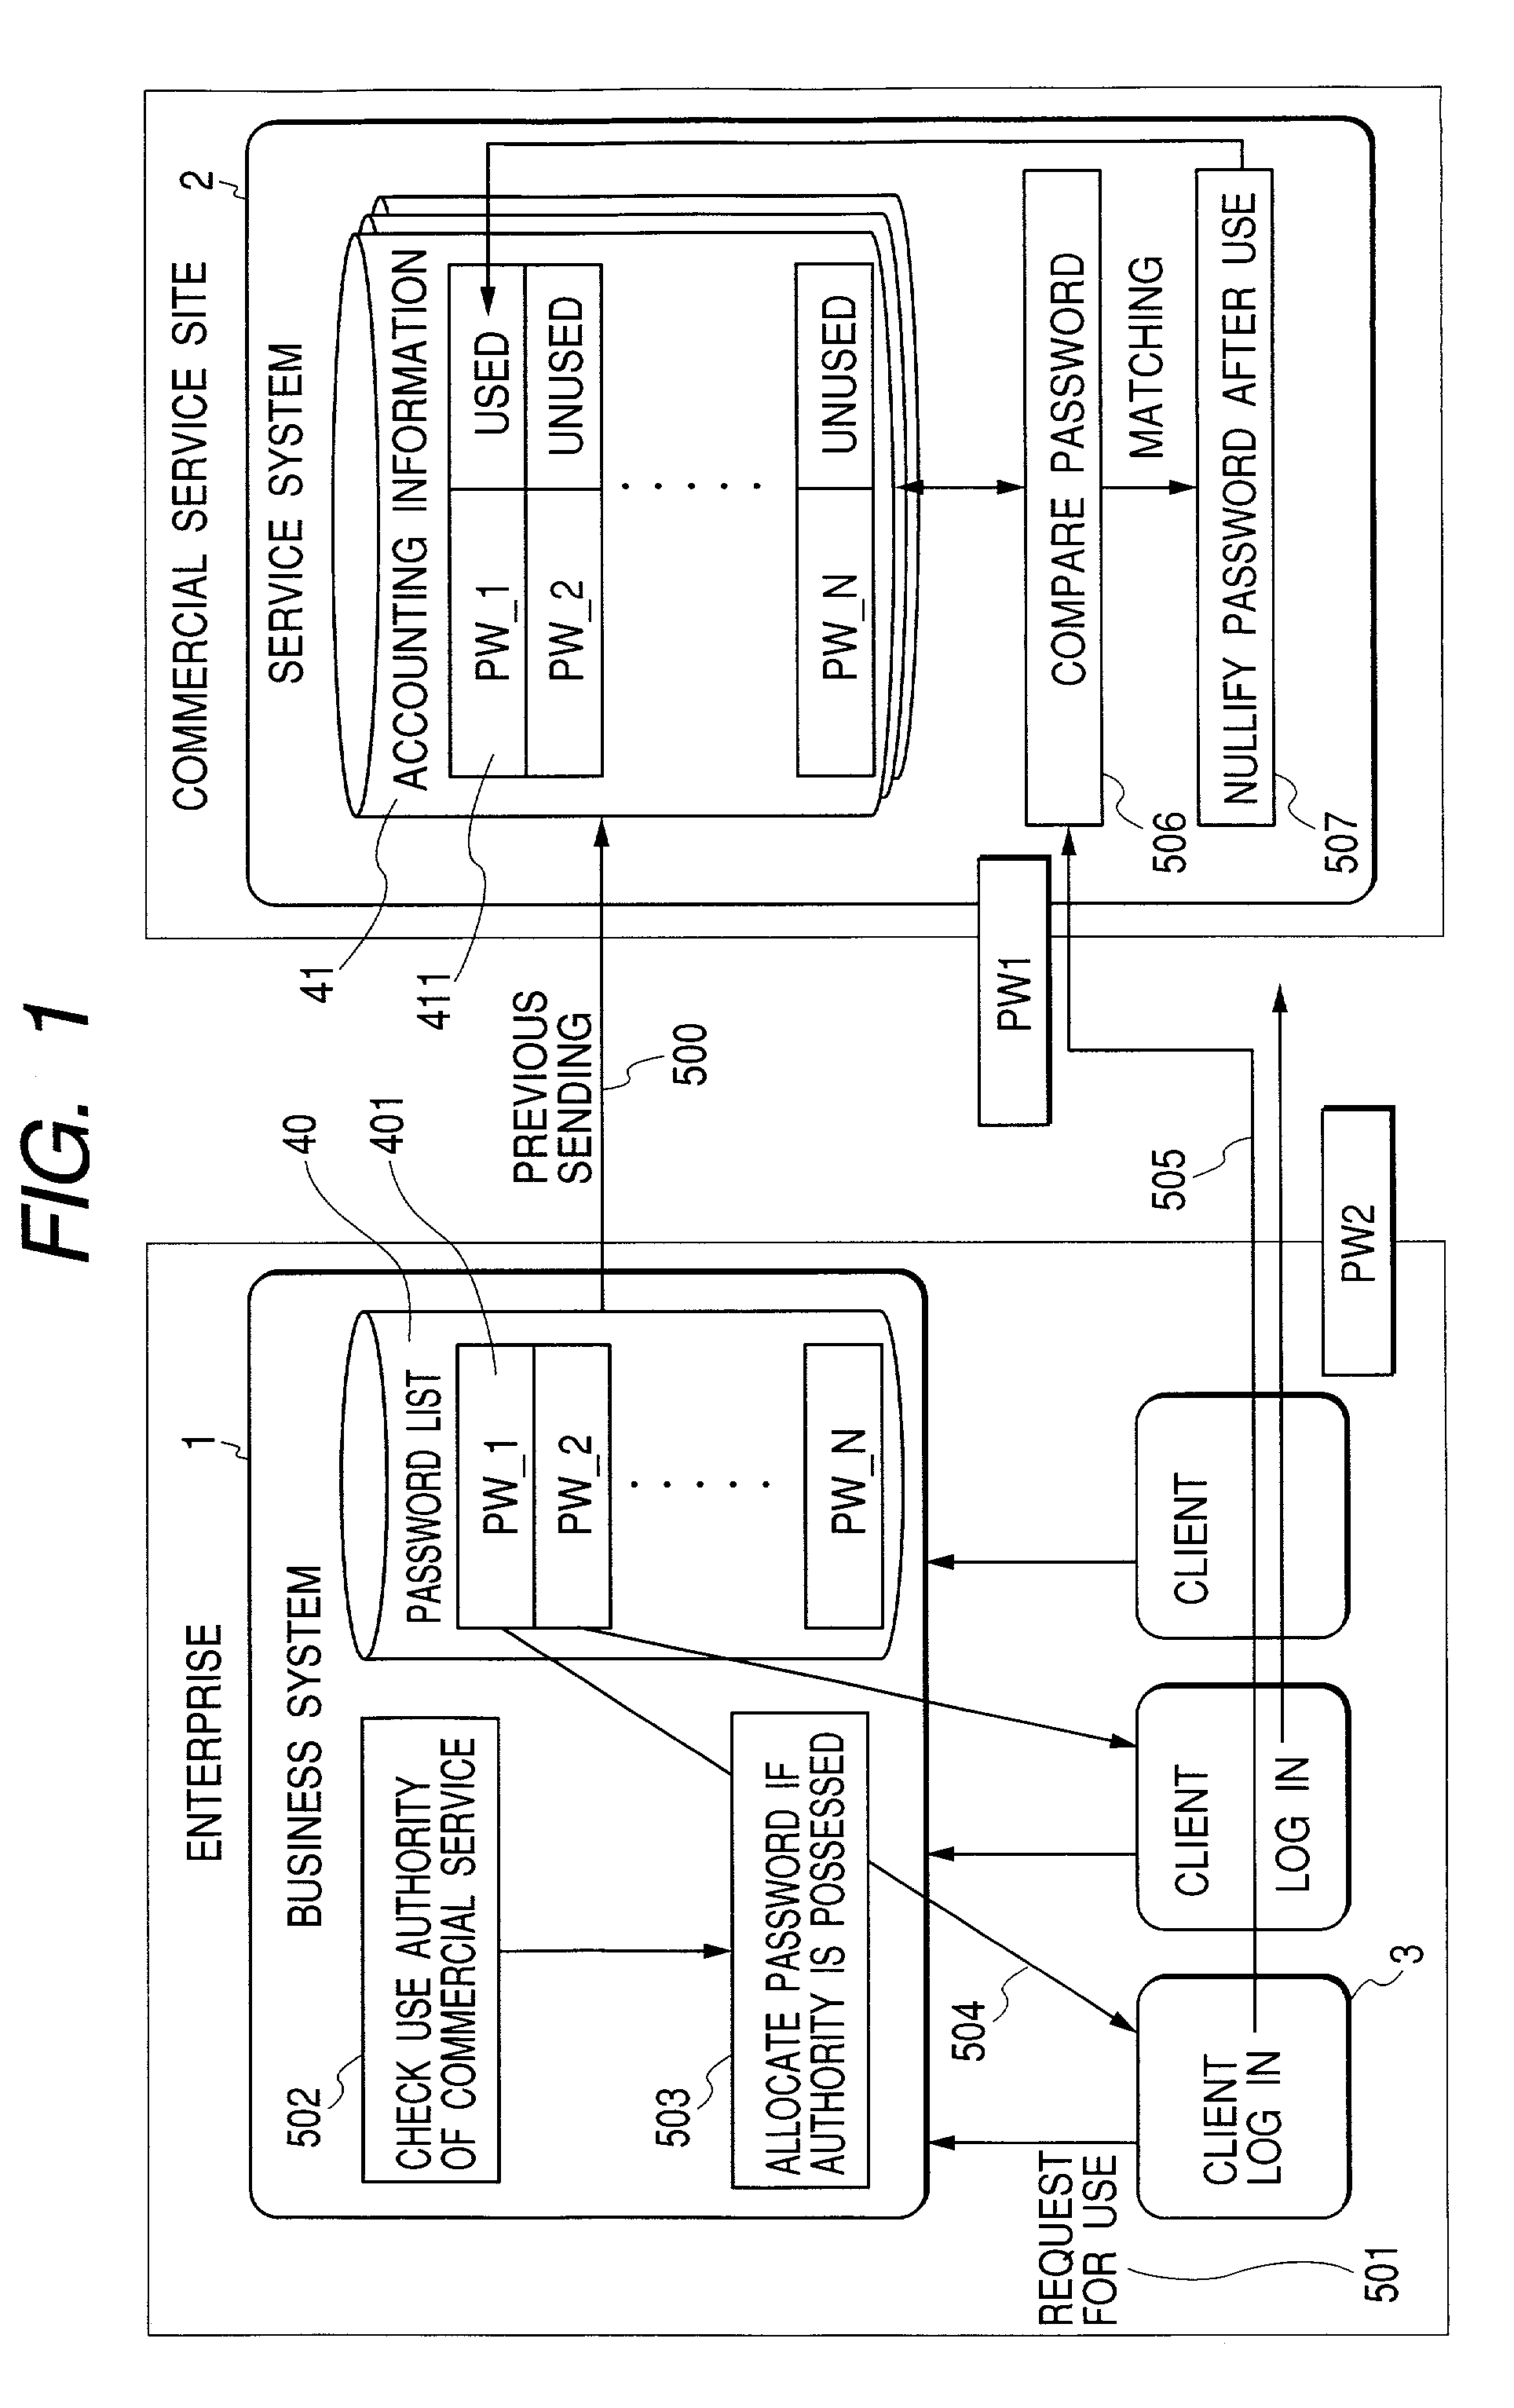 One-time logon method for distributed computing systems